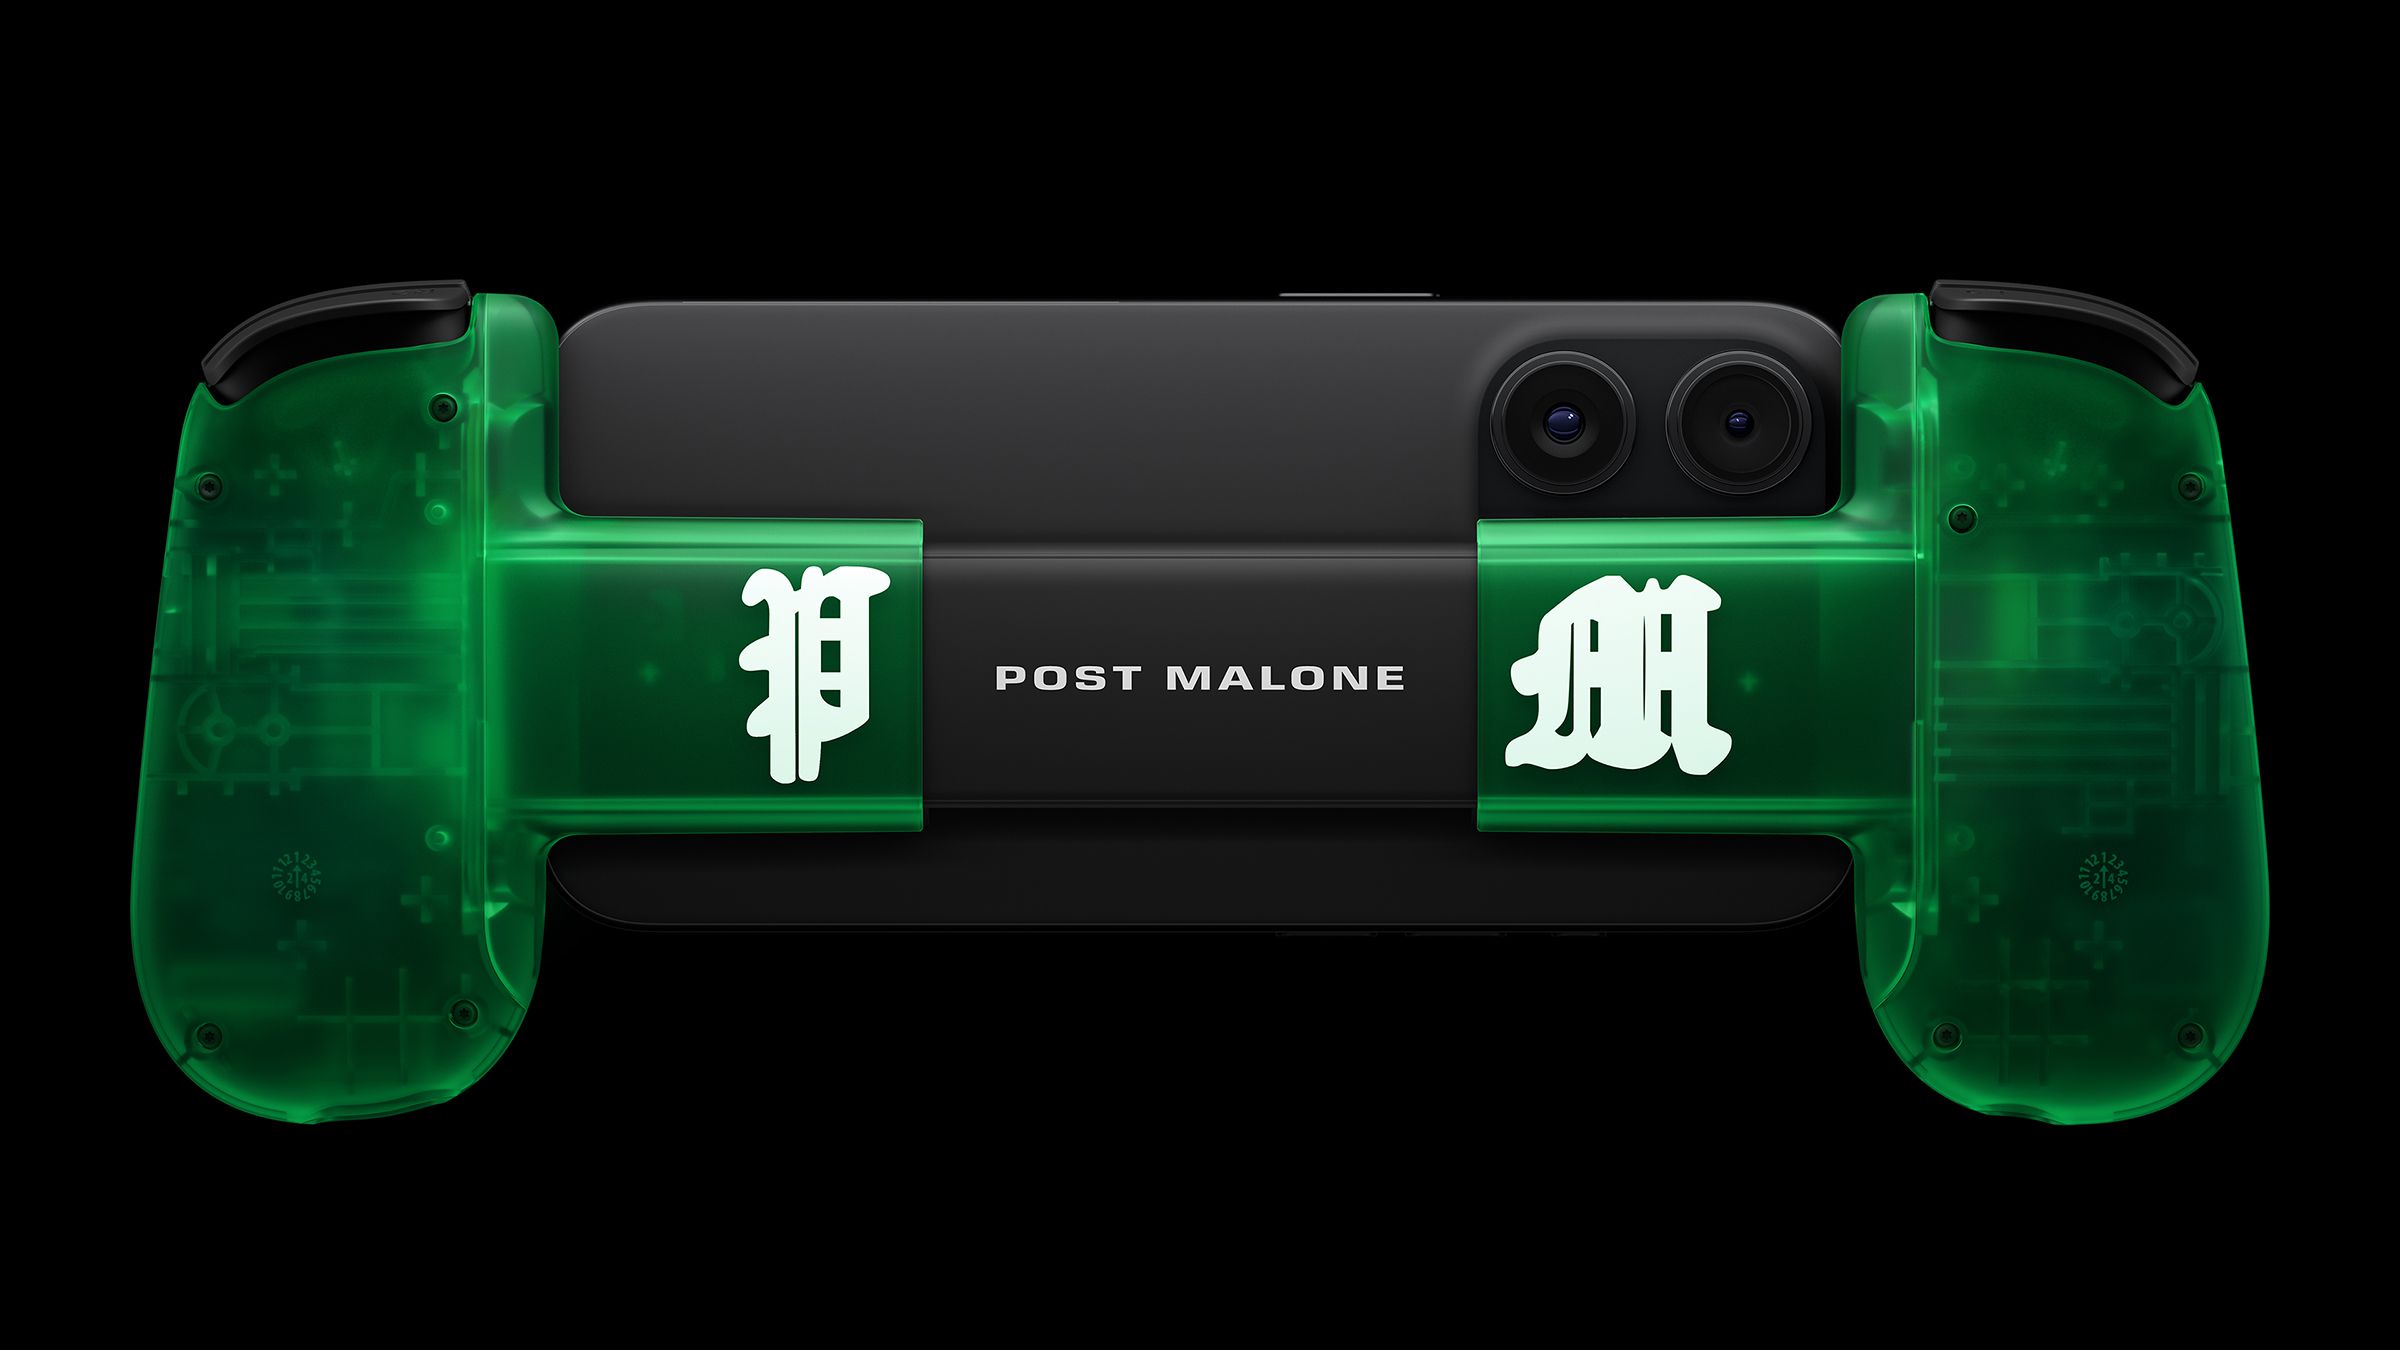 The back of the Backbone One: Post Malone Limited Edition Controller with an iPhone connected.